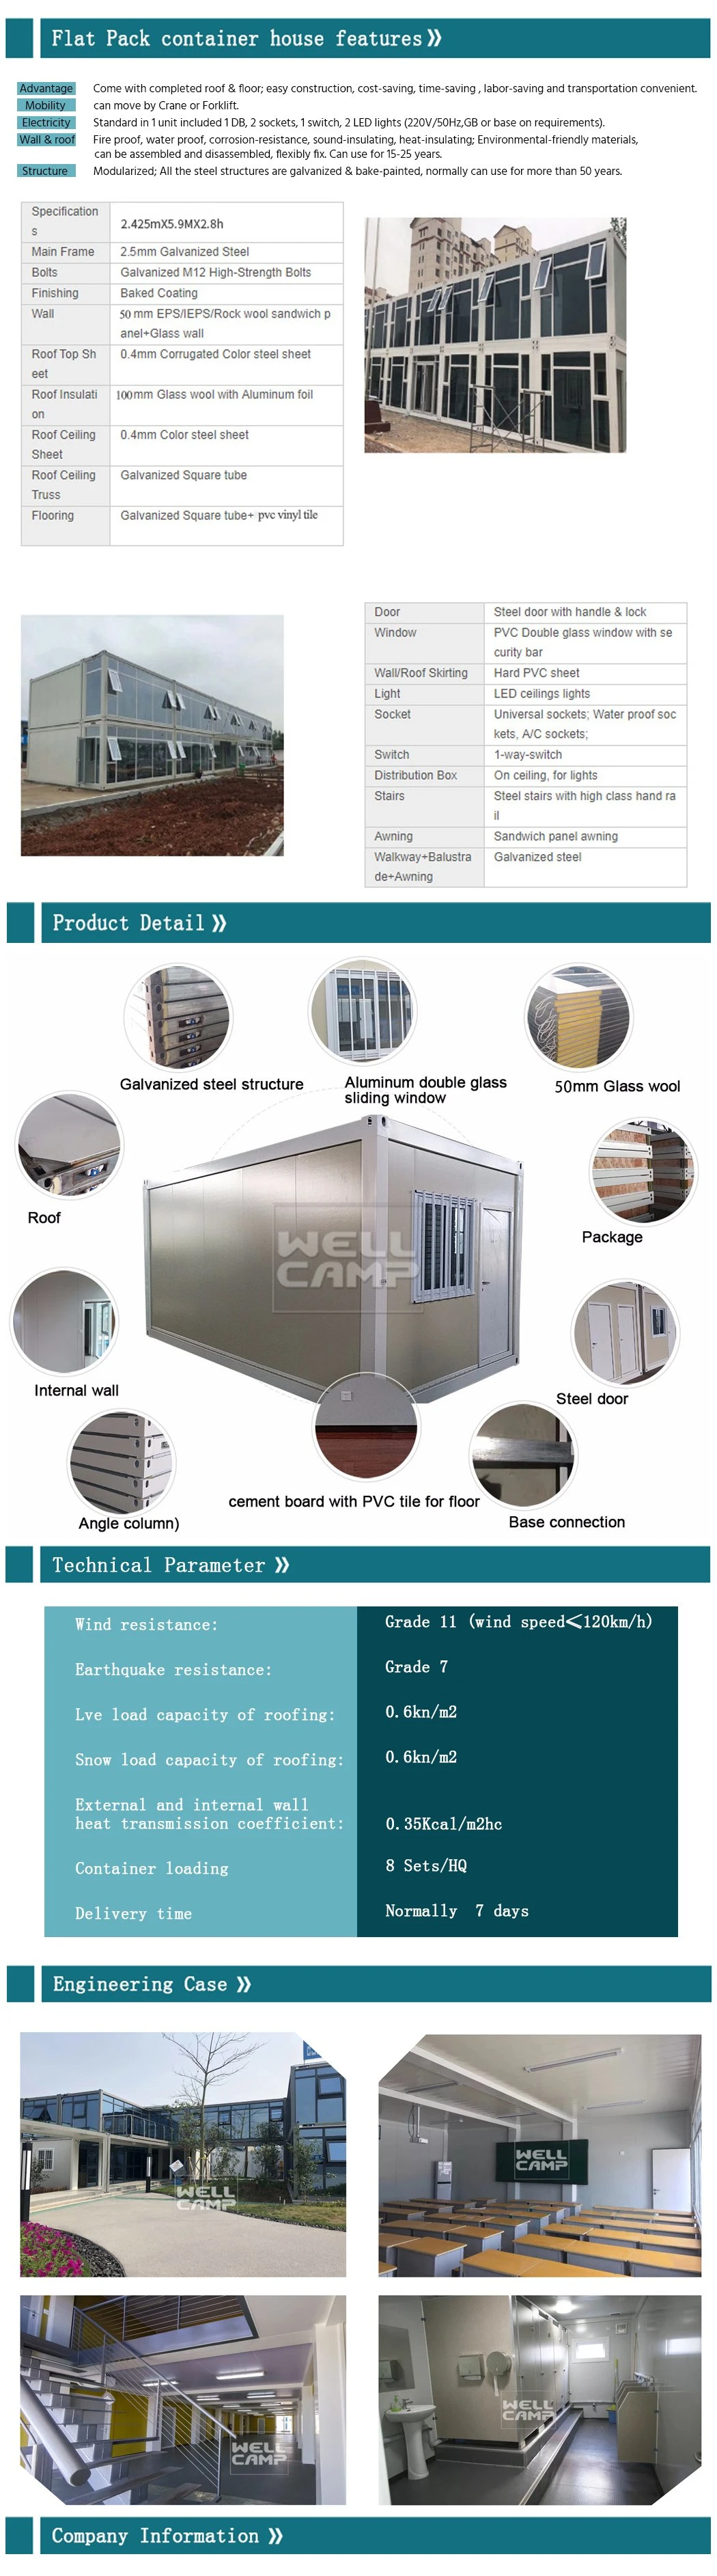 Economic Modified Flat Pack Container House Prefabricated/Prefab House